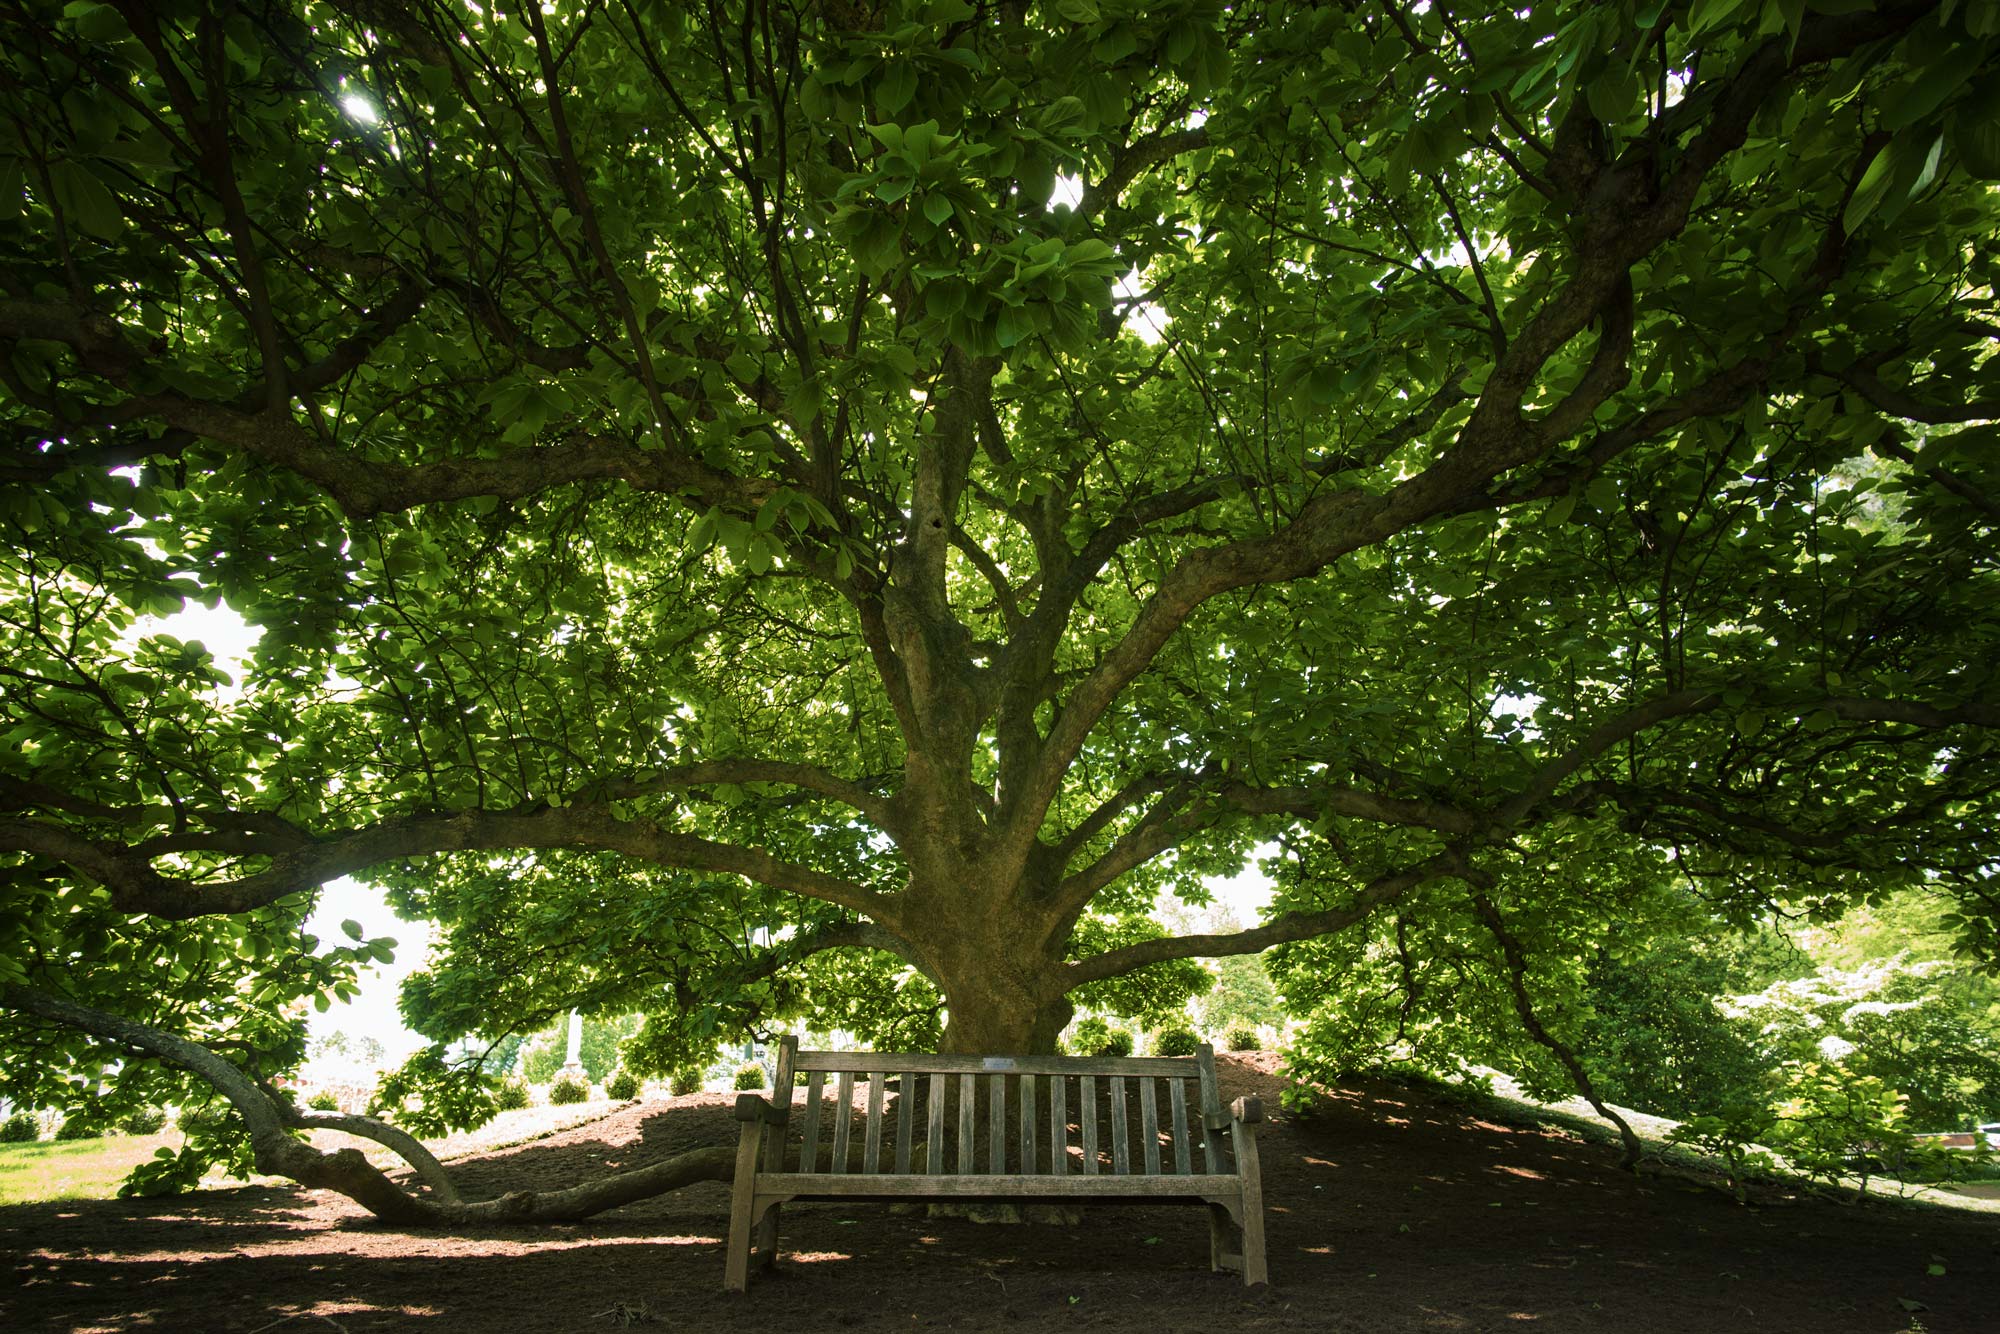 Bench underneath of a tree